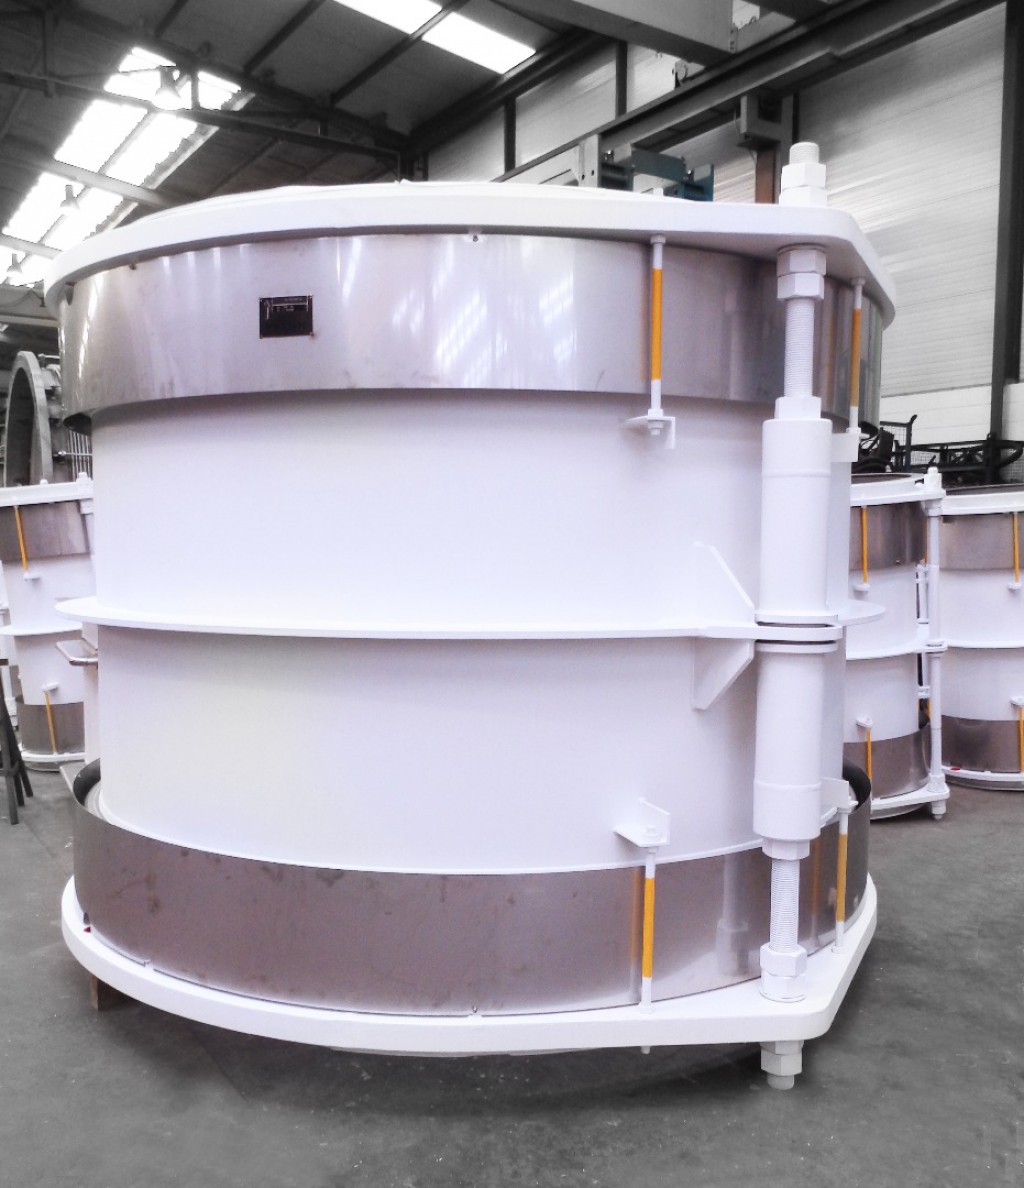 MACOGA Expansion Joints for FLUOR / SASOL Chemicals USA